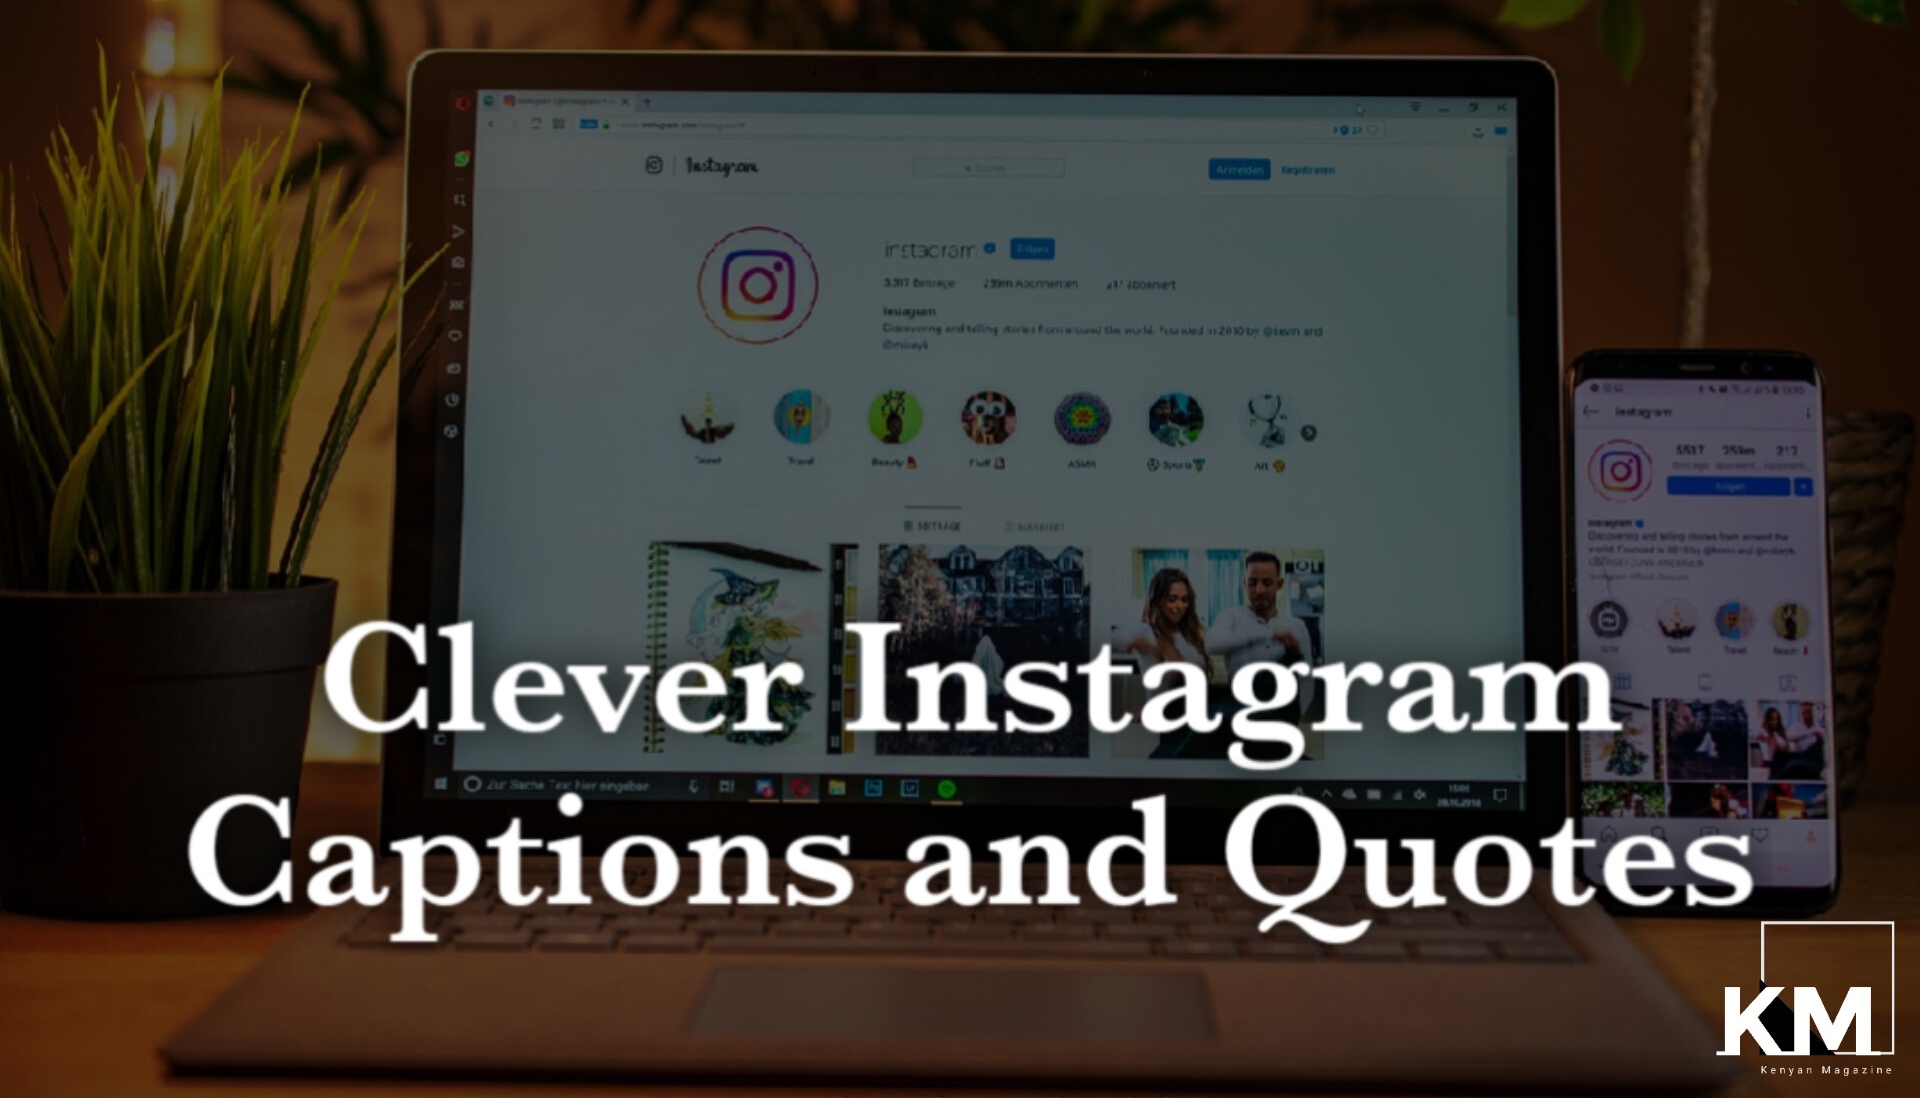 Clever Instagram Captions and quotes